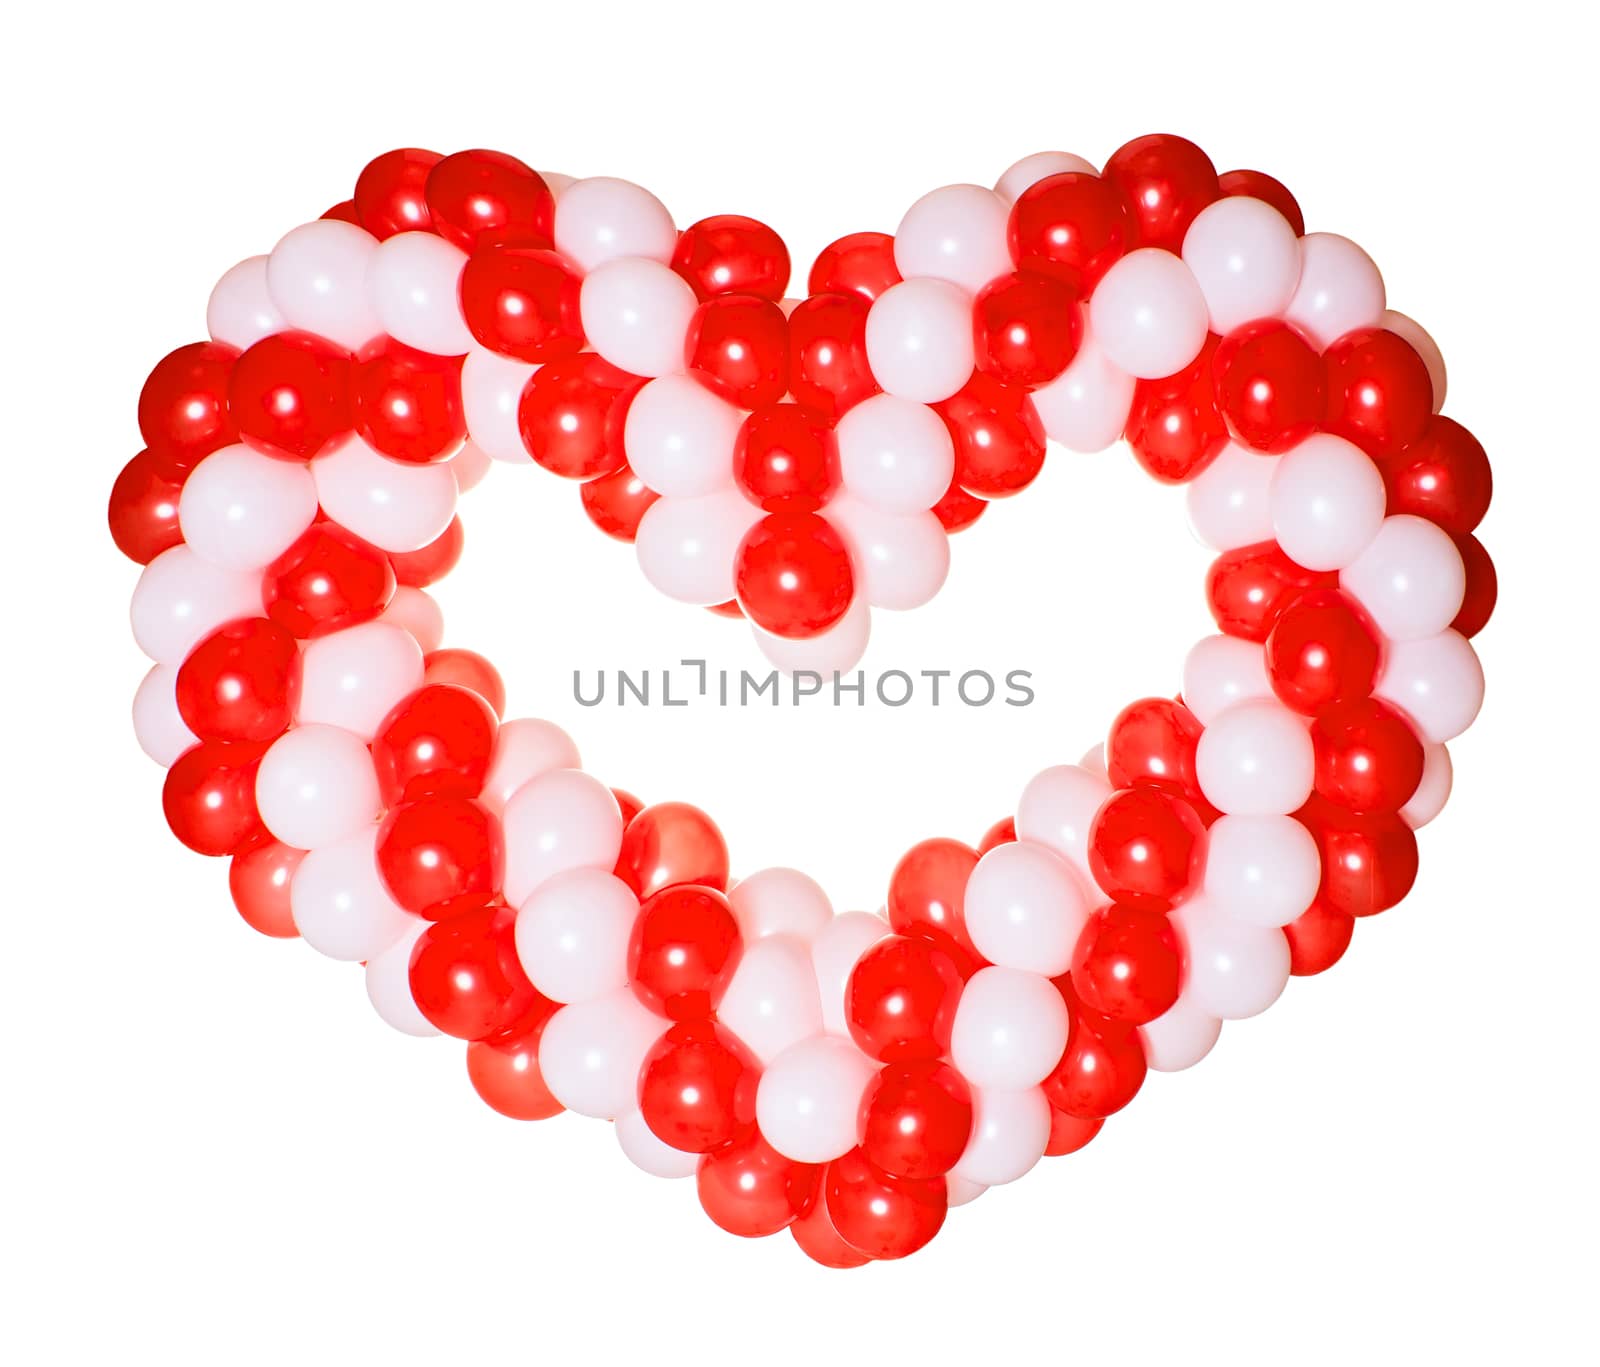 Heart shape made from red and white balloons by Valengilda